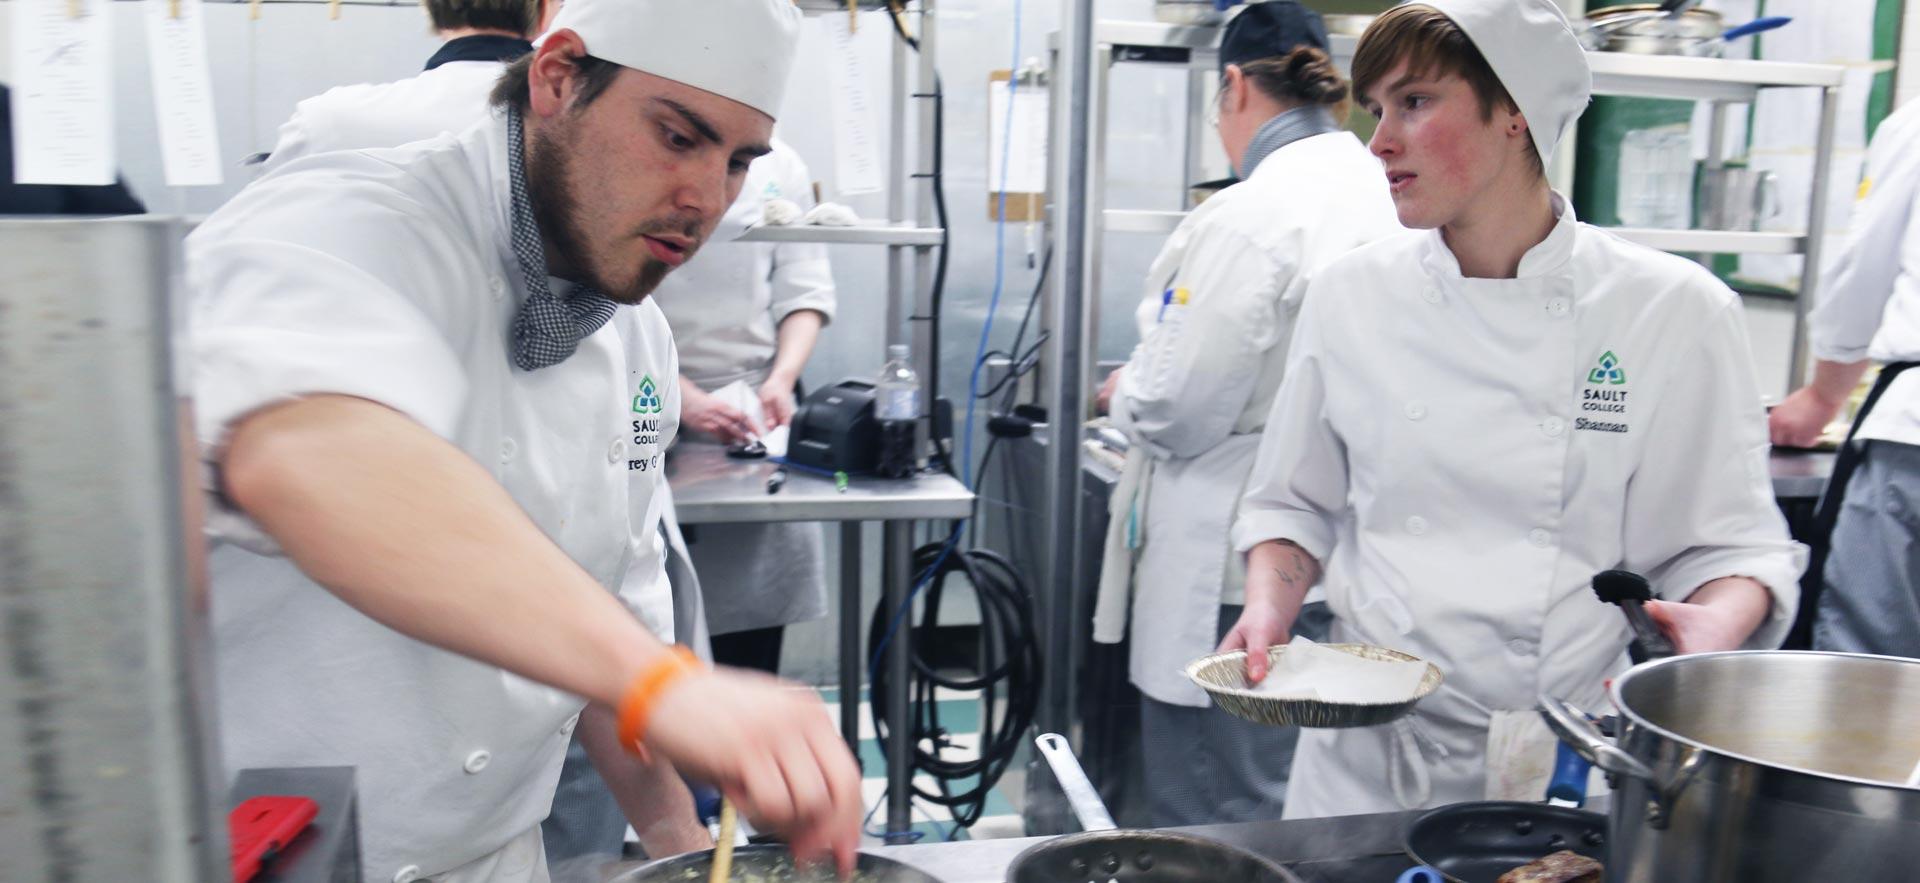 Busy culinary students work on an assignment in one of the Sault College culinary kitchens.